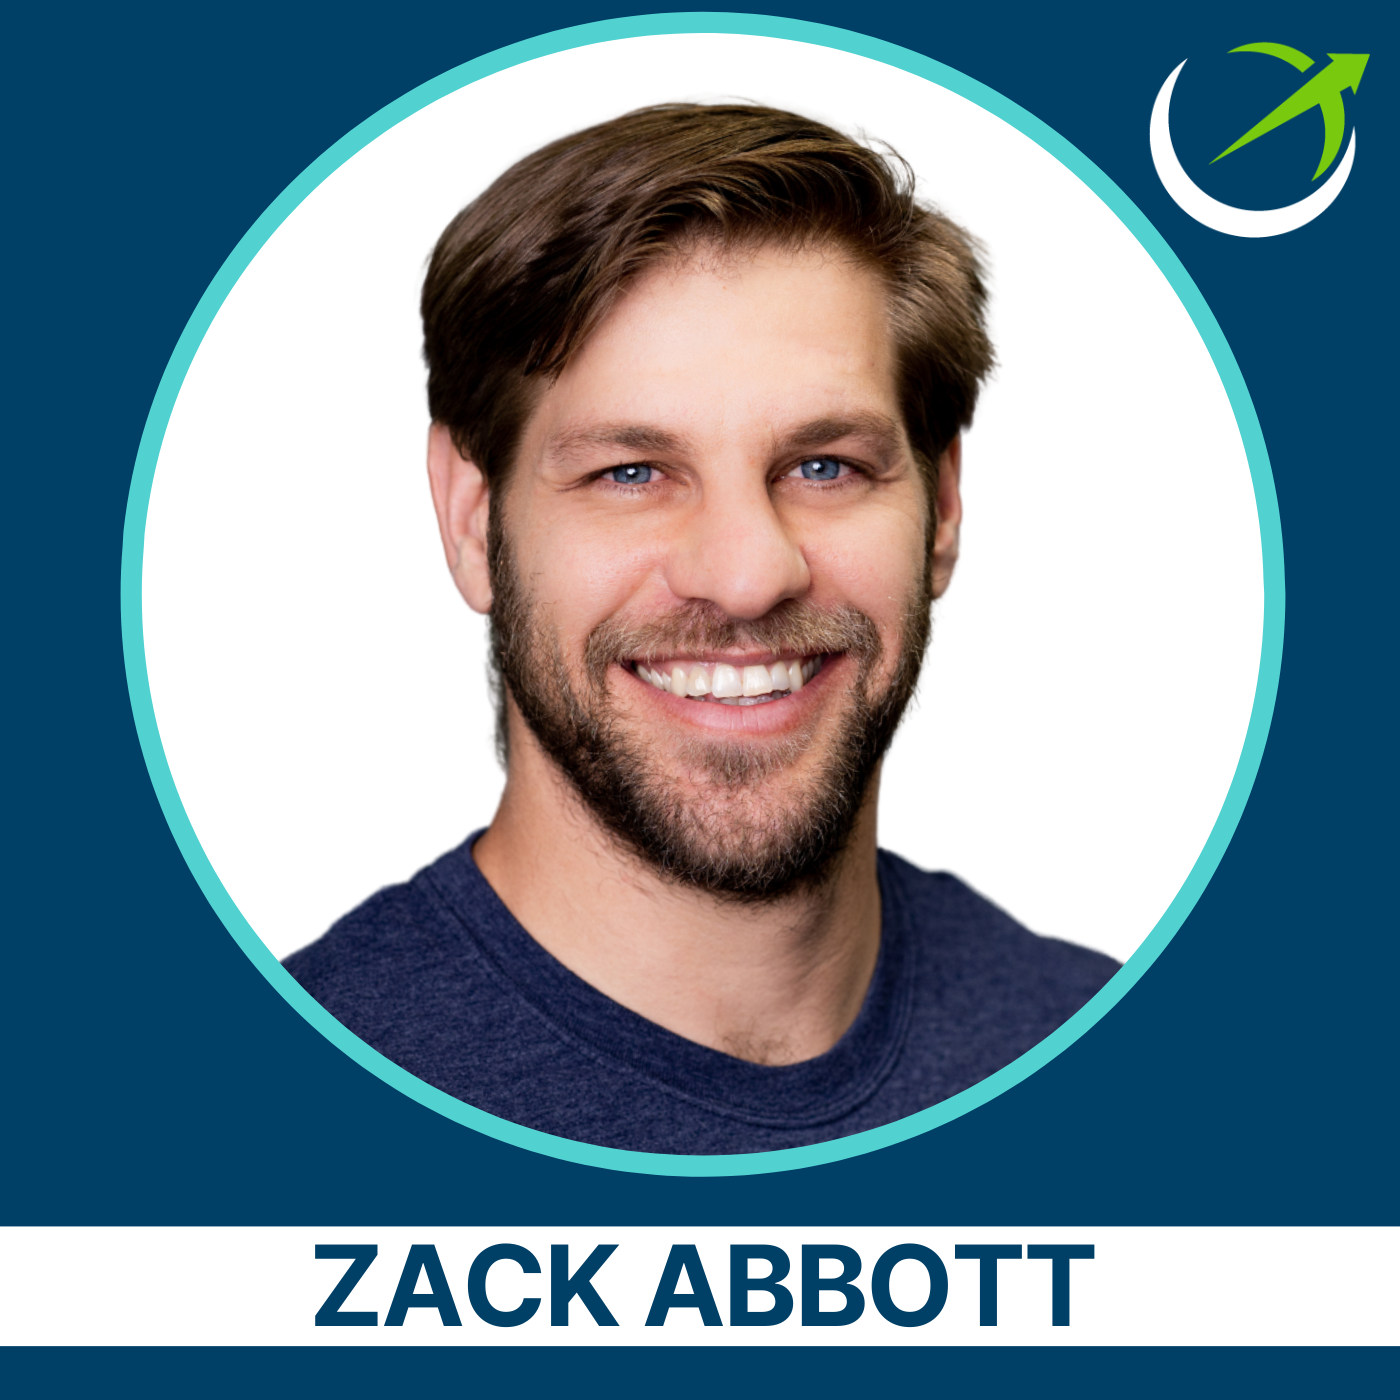 How A Specially Engineered Bacterial Strain Can Allow You To Enjoy Drinking Alcohol Without Toxic Hangovers, With ZBiotics Zack Abbott.